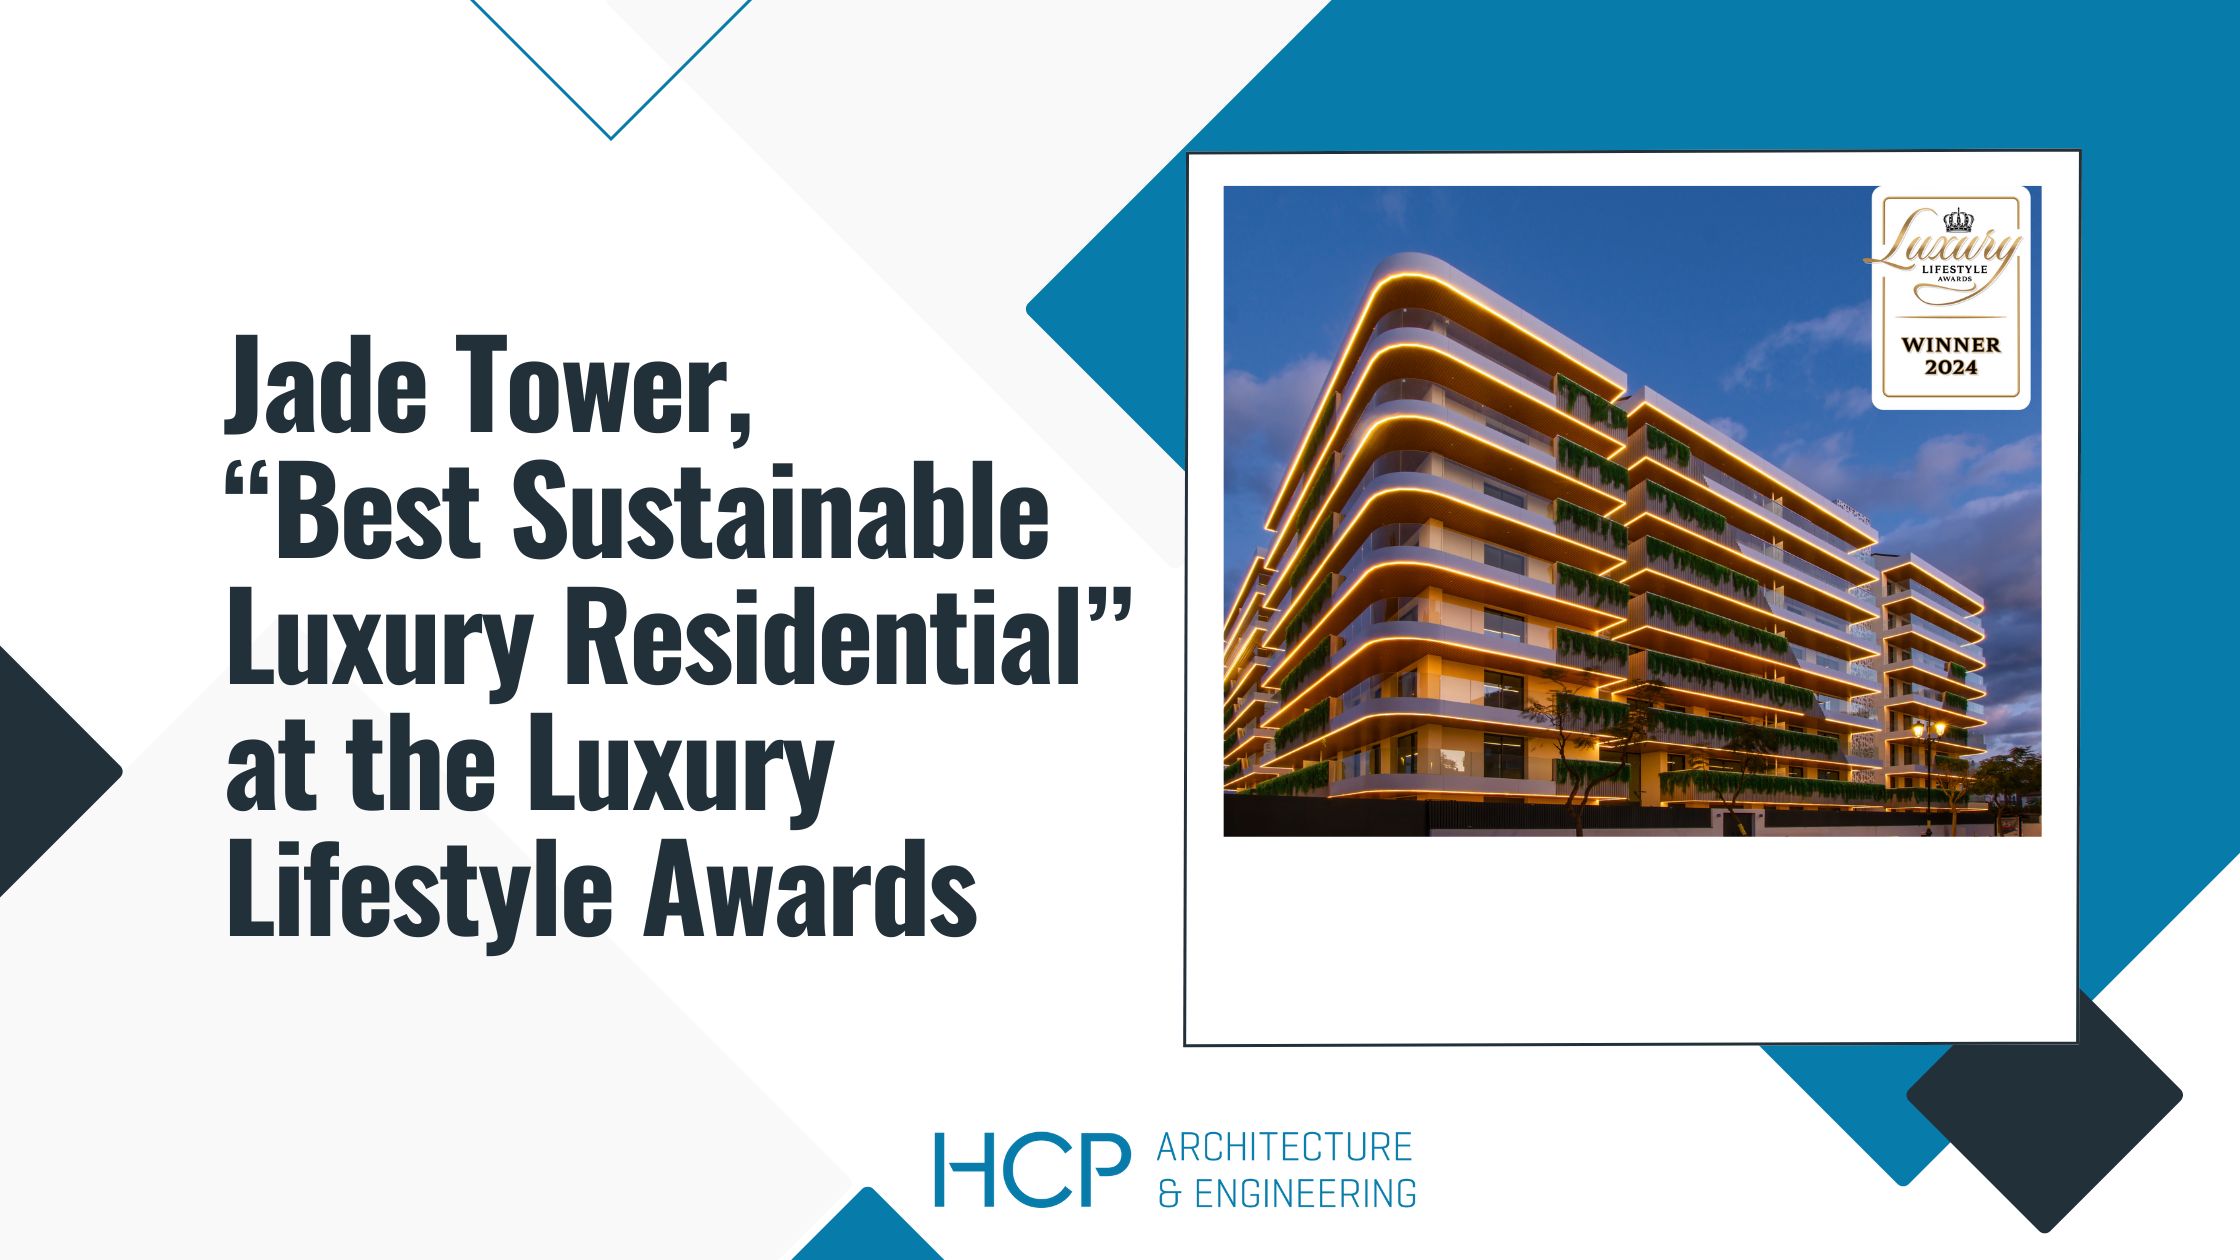 Jade Tower, by HCP, wins the "Best Sustainable Luxury Residential" at the Luxury Lifestyle Awards